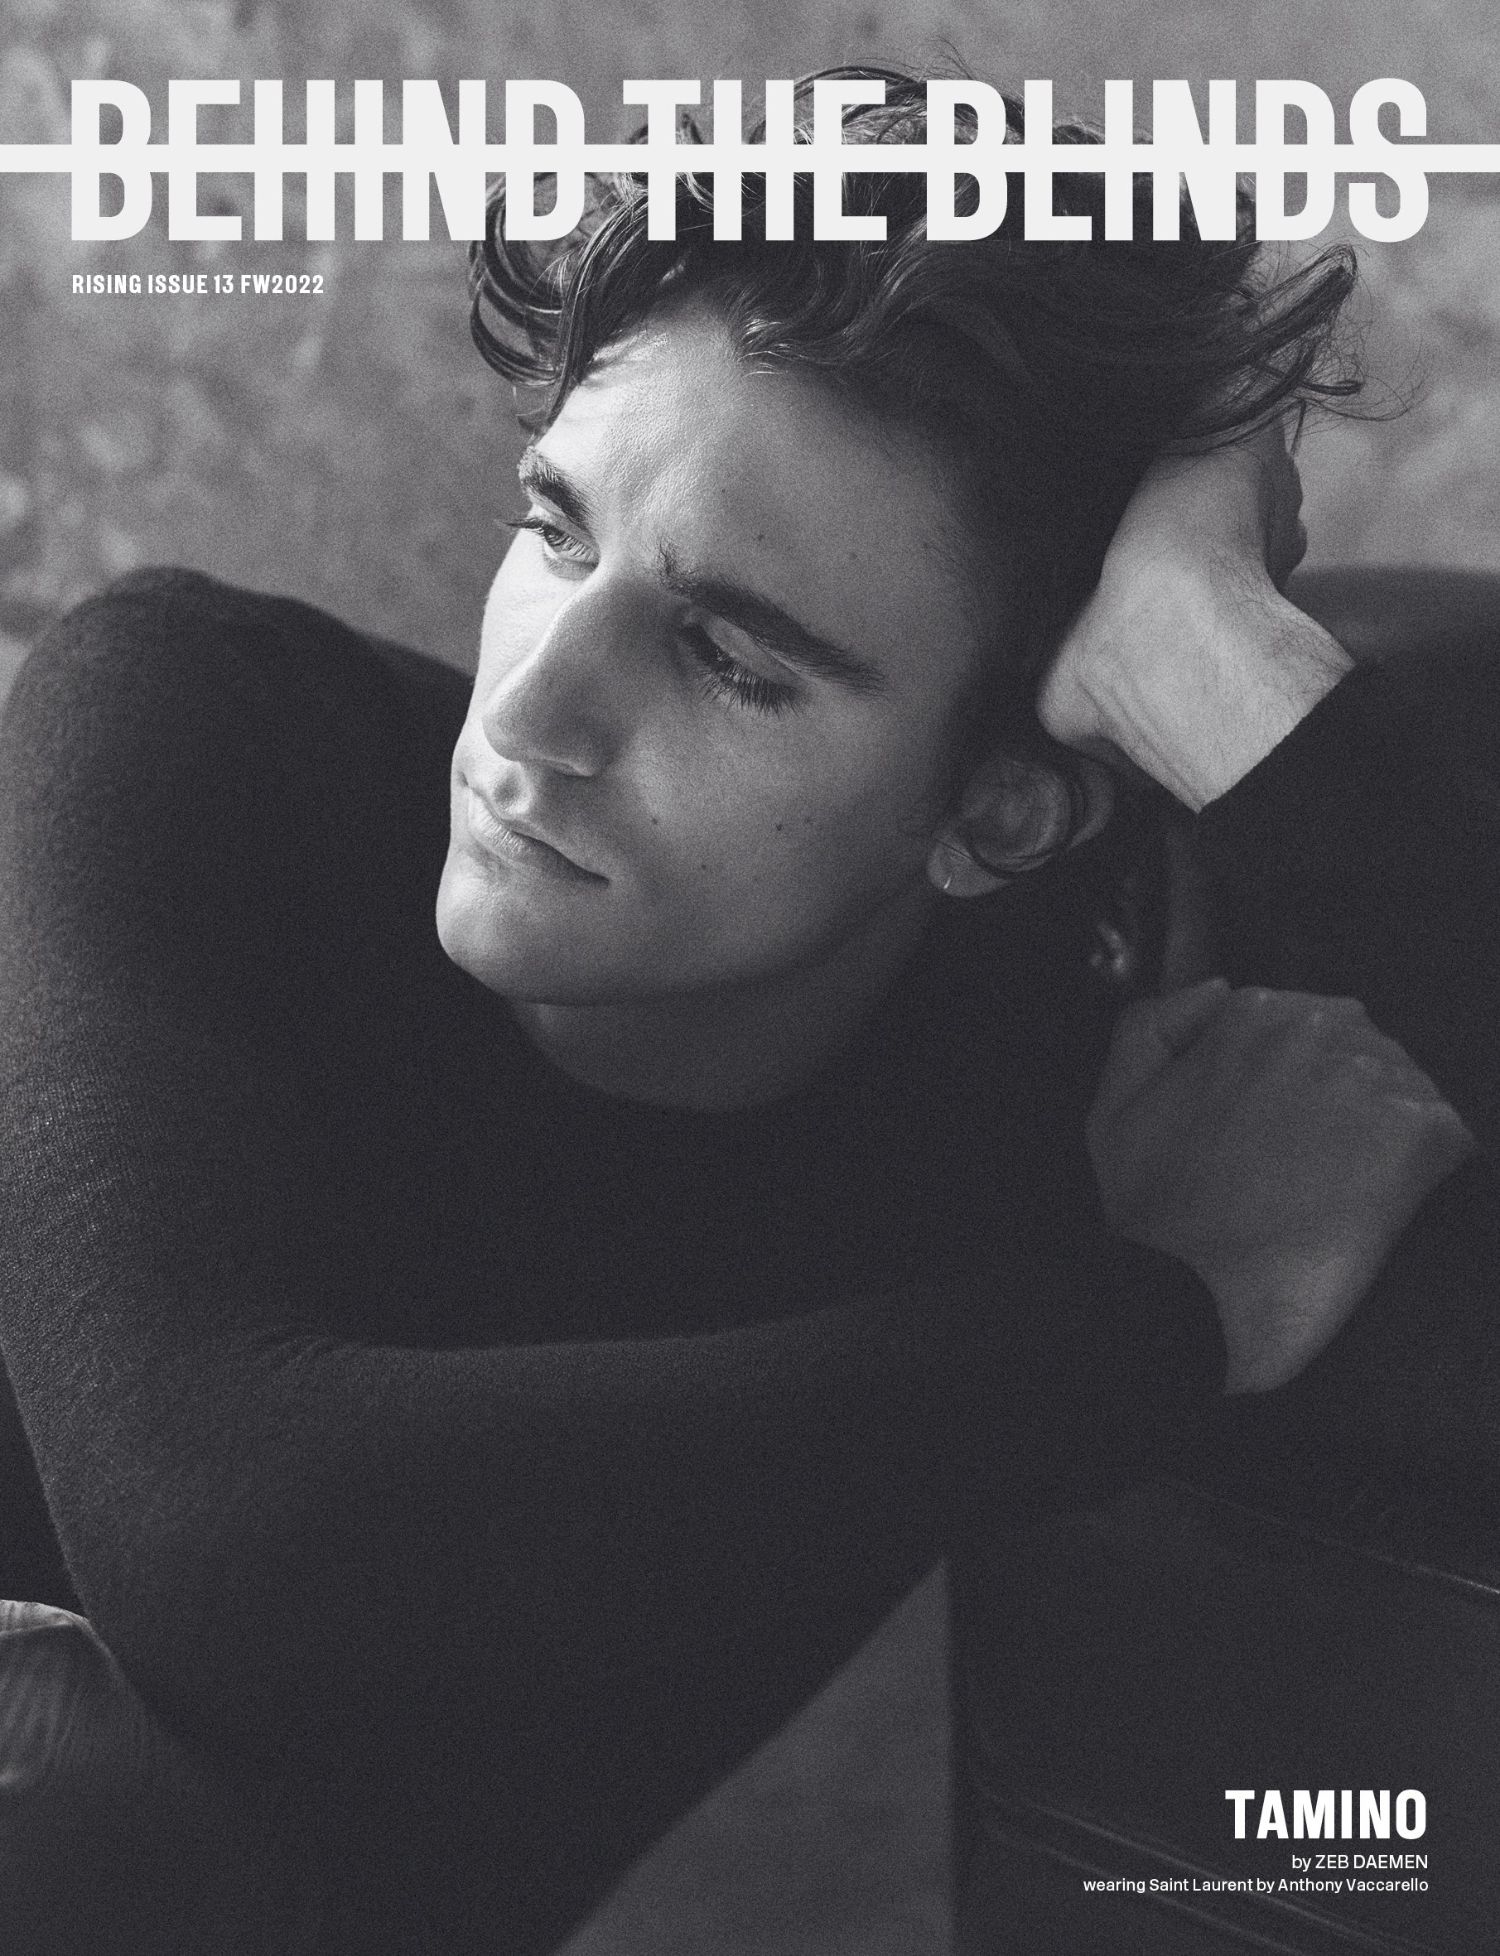 Tamino Covers Behind the Blinds Fall-Winter 2022 Rising Issue